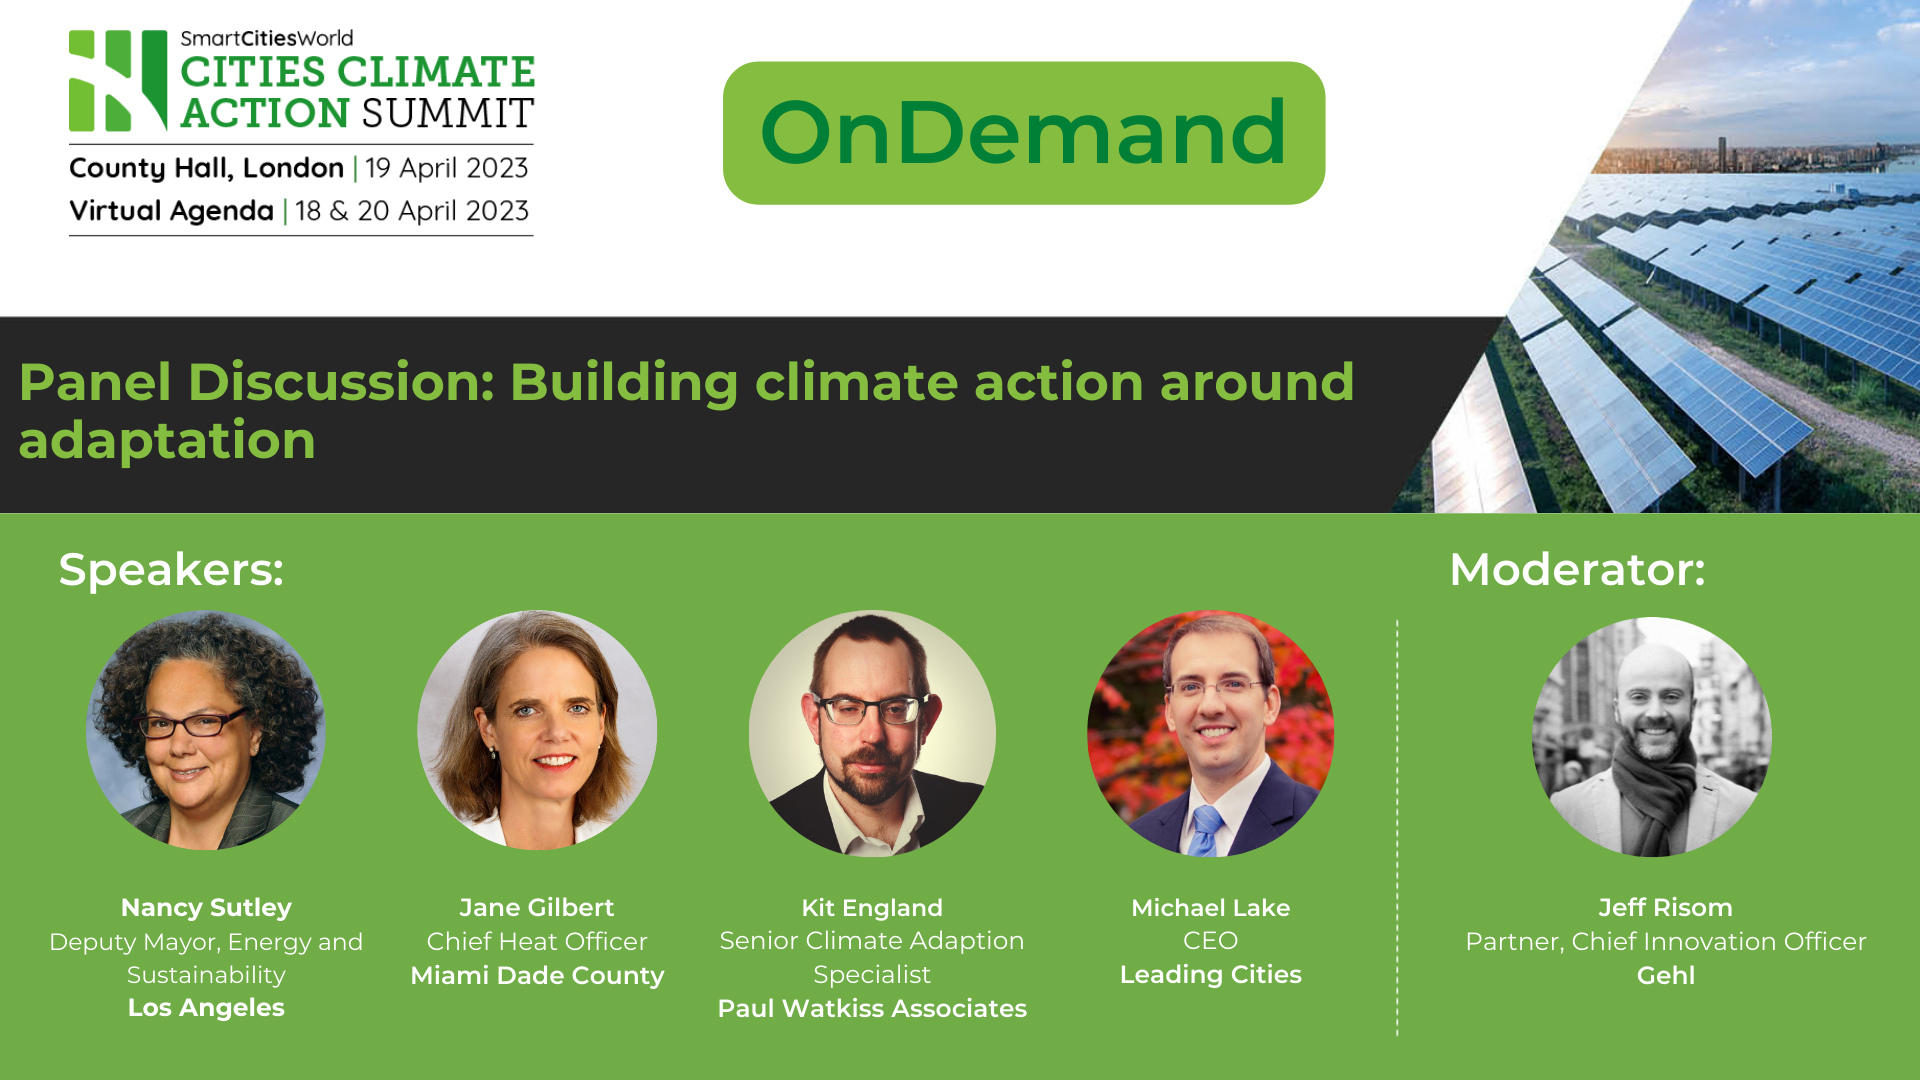 OnDemand Panel discussion: Building climate action around adaptation